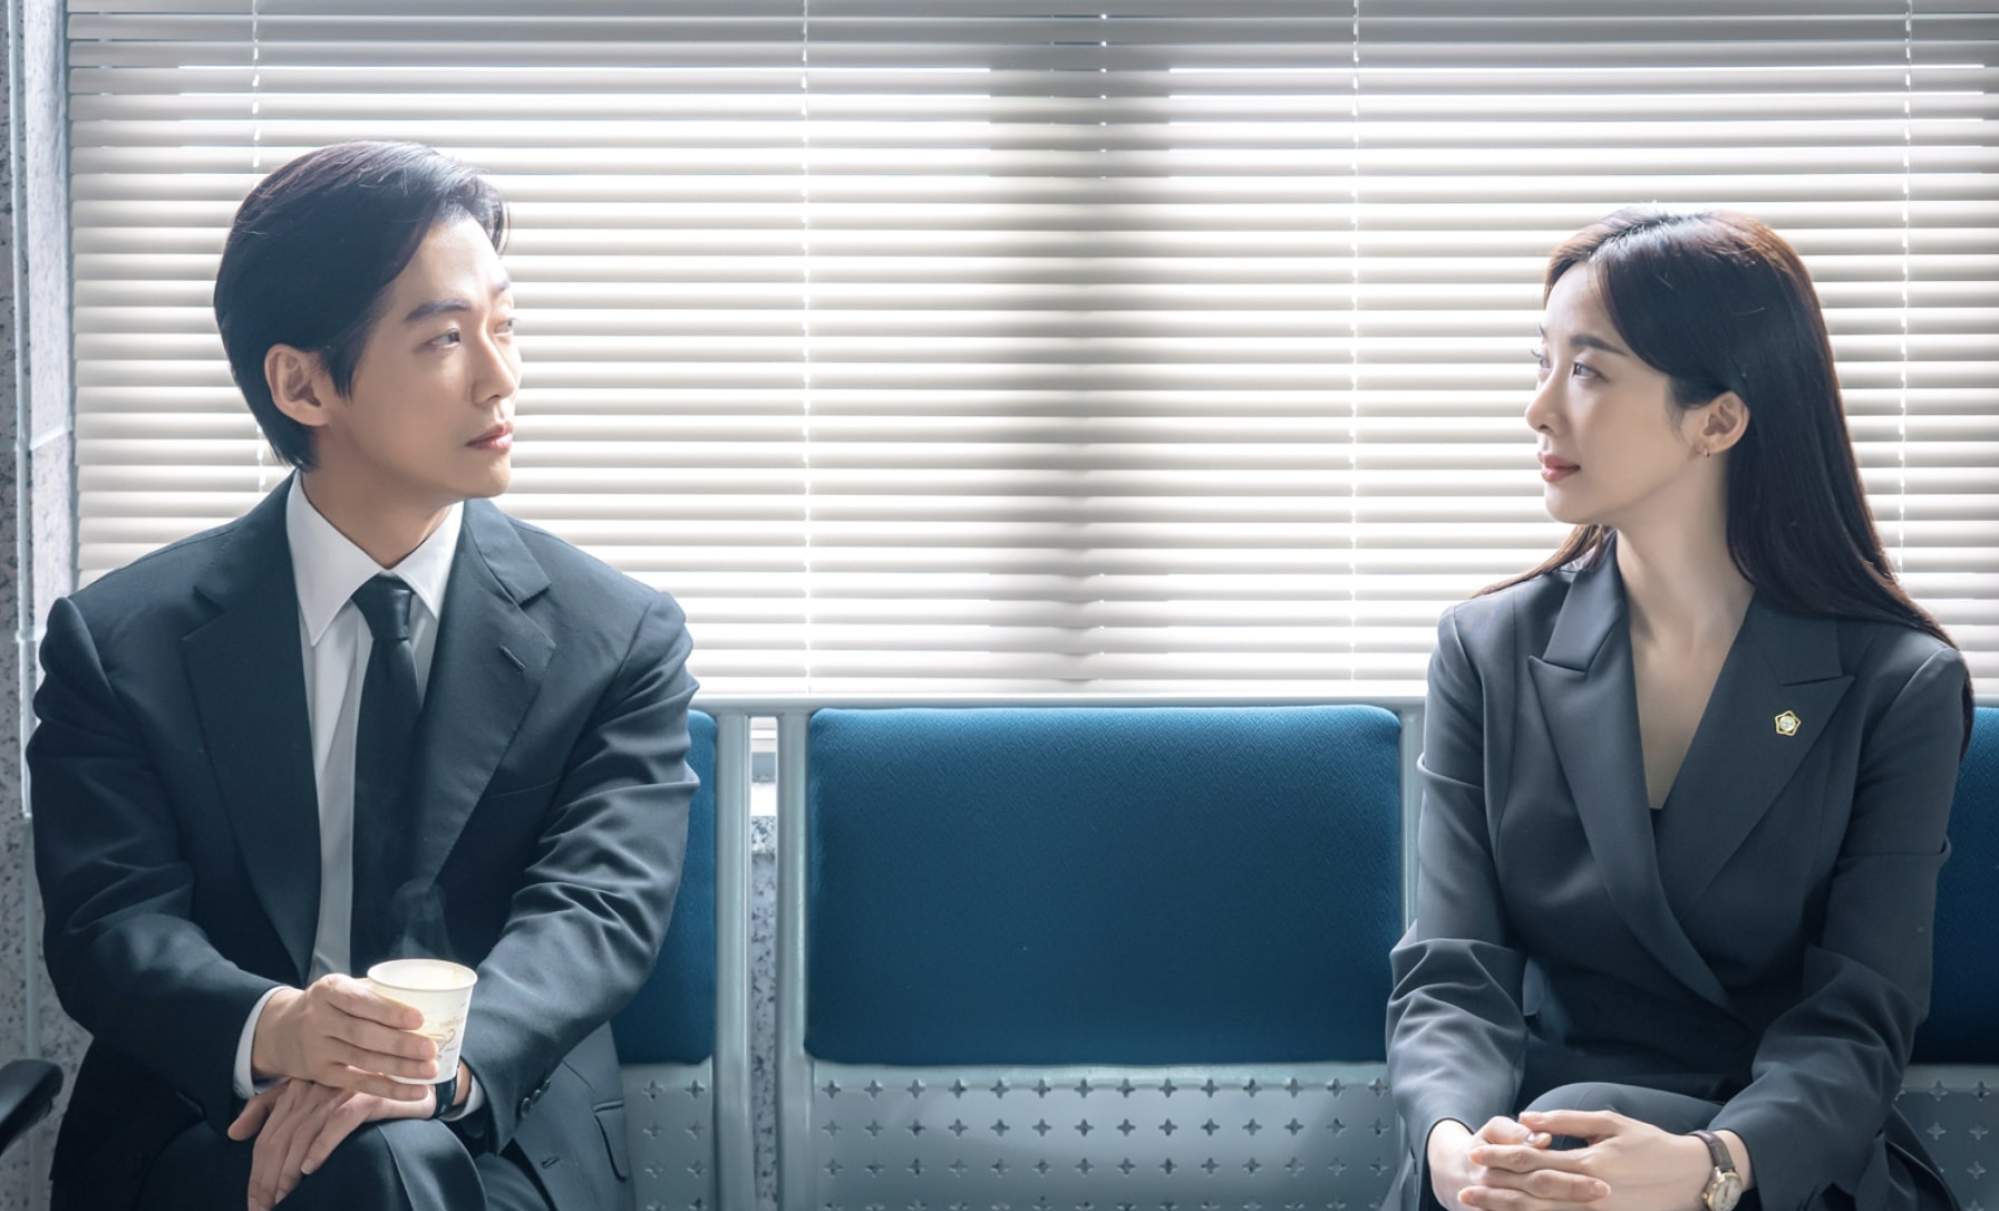 K Drama Review One Dollar Lawyer Disney Series Starring Namgoong Min Elevates Legal Tropes 3645